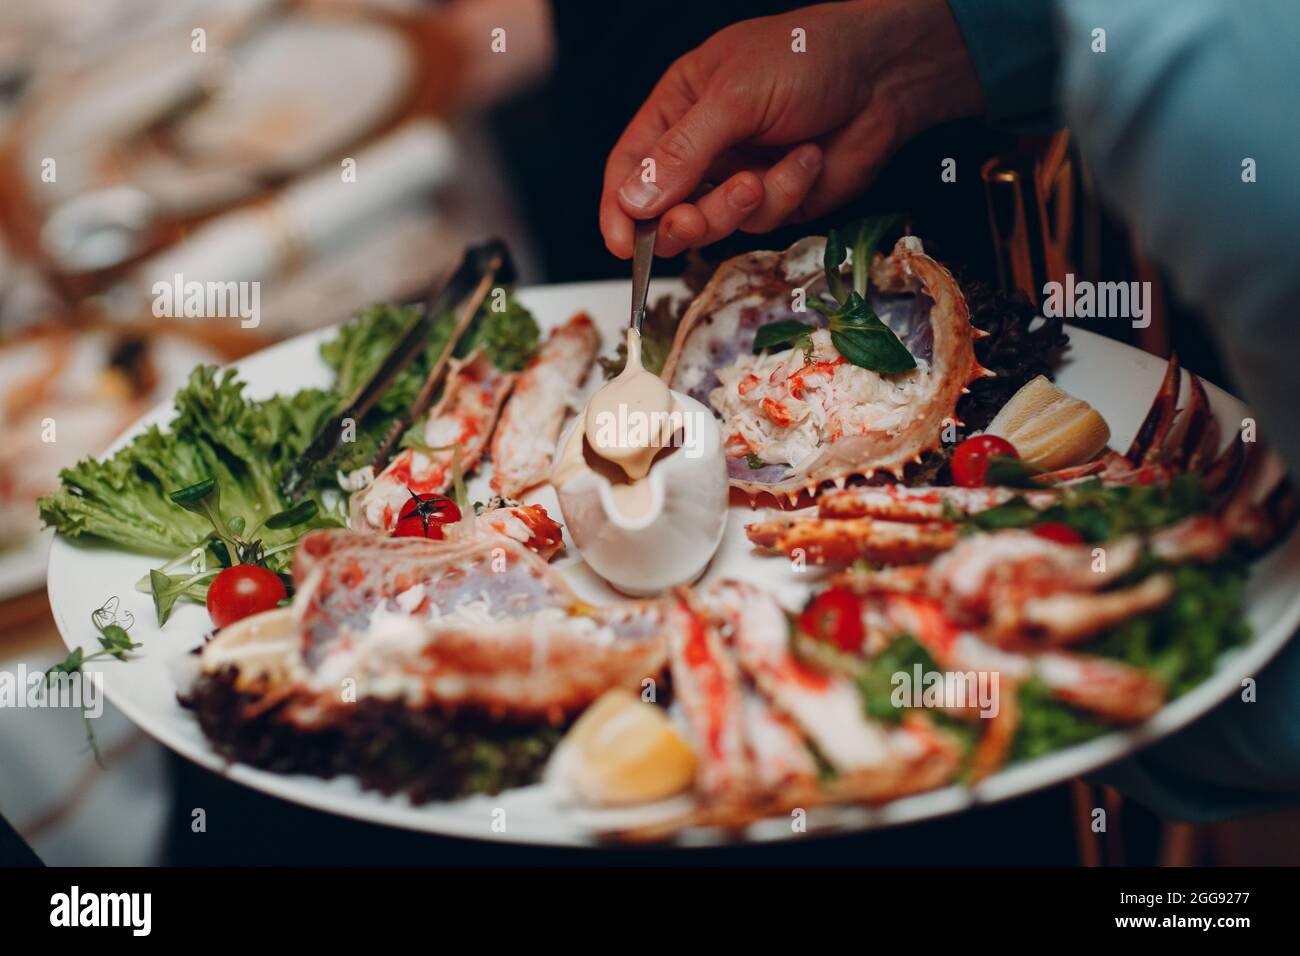 a waiter in a restaurant holds seafood dishes and serves a table catering Concept Healthy food octopus and crabs shellfish. Stock Photo